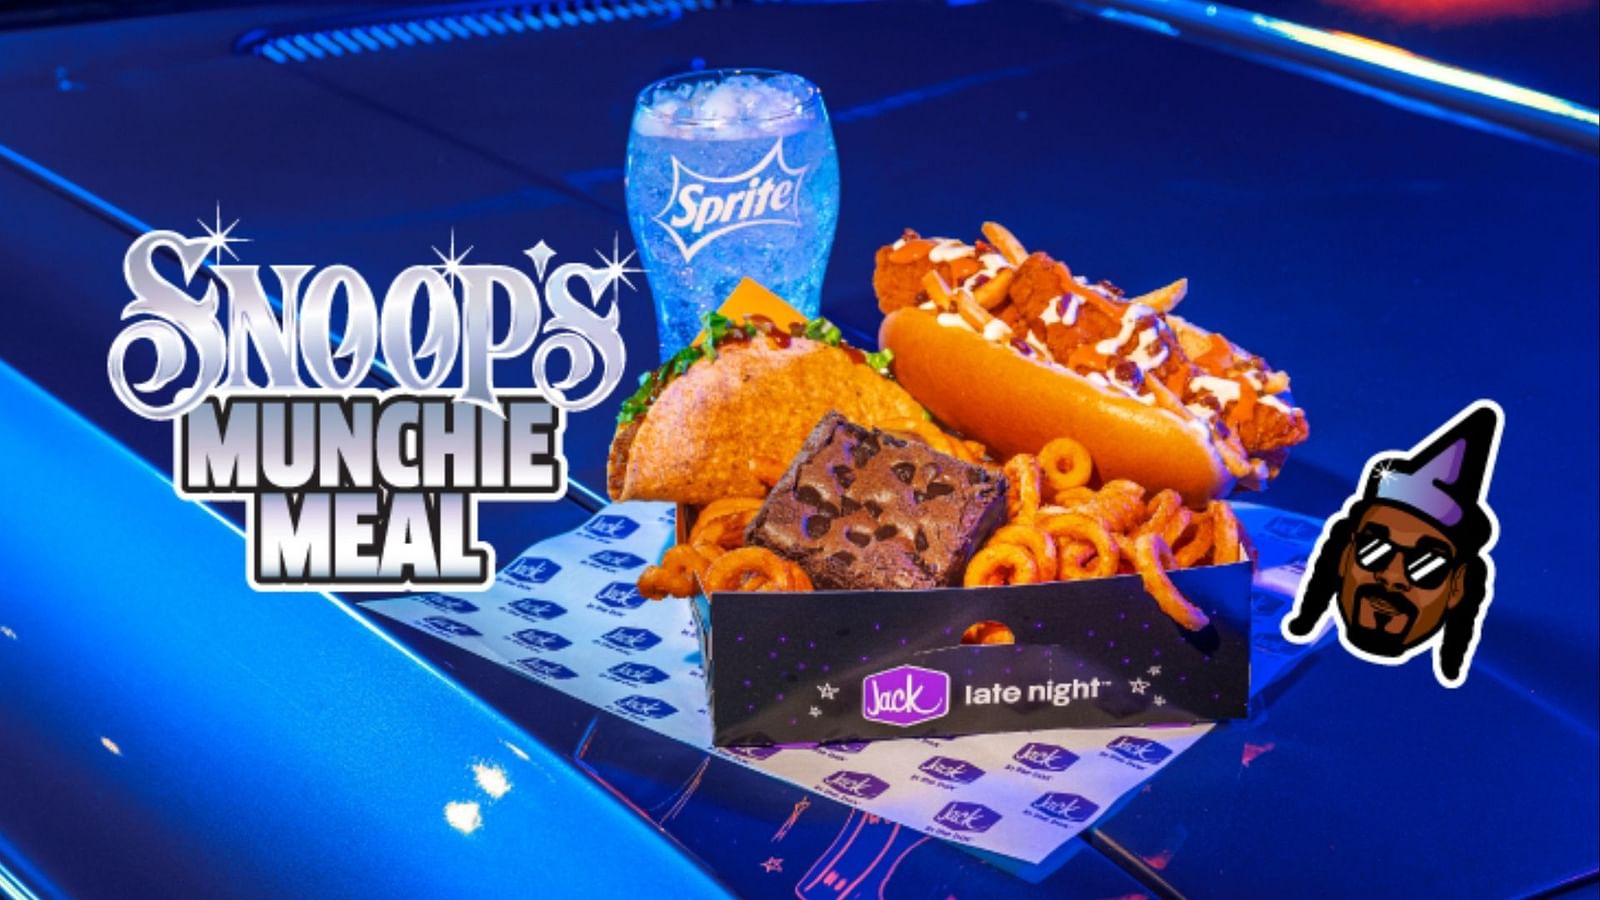 Jack in the Box Snoop’s Munchie Meal Items, price, availability, and